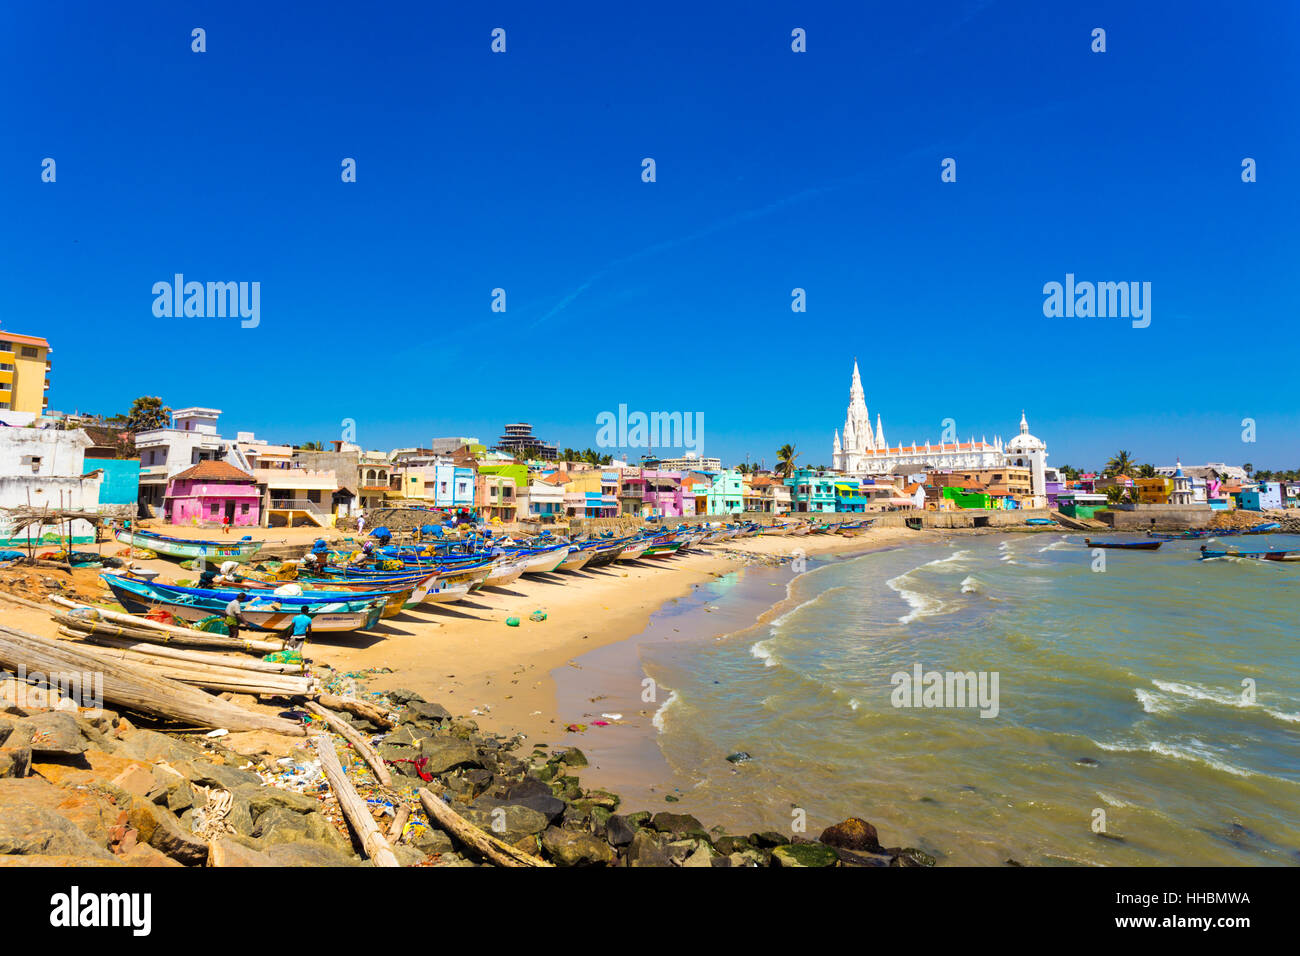 Our Lady of Ransom Shrine Church behind colorful houses on a sand beach occupied by fishing boats in Tamil Nadu. Horizontal Stock Photo